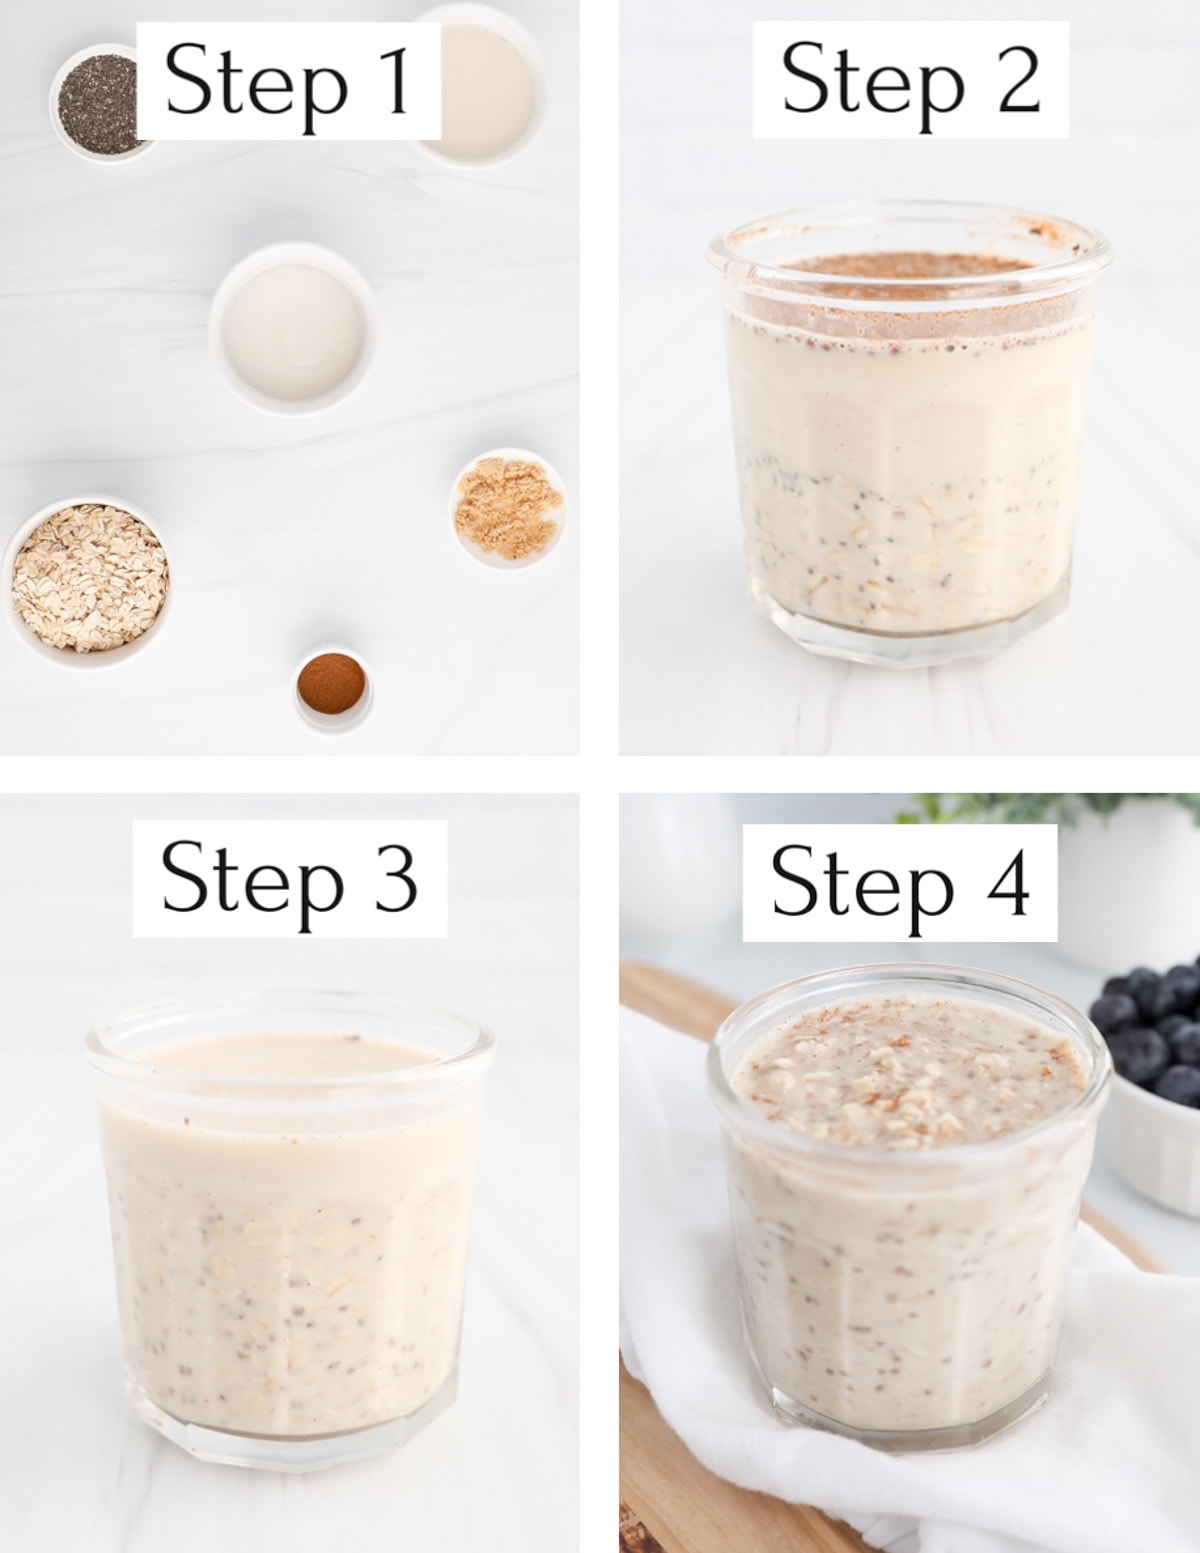 Four images in a collage labeled step 1-step 4. Step 1: ingredients in small white bowls, step 2: a clear jar with oat milk and unmixed ingredients, step 3: the clear jar now has ingredients mixed, step 4: the completed overnight oats in a clear jar.